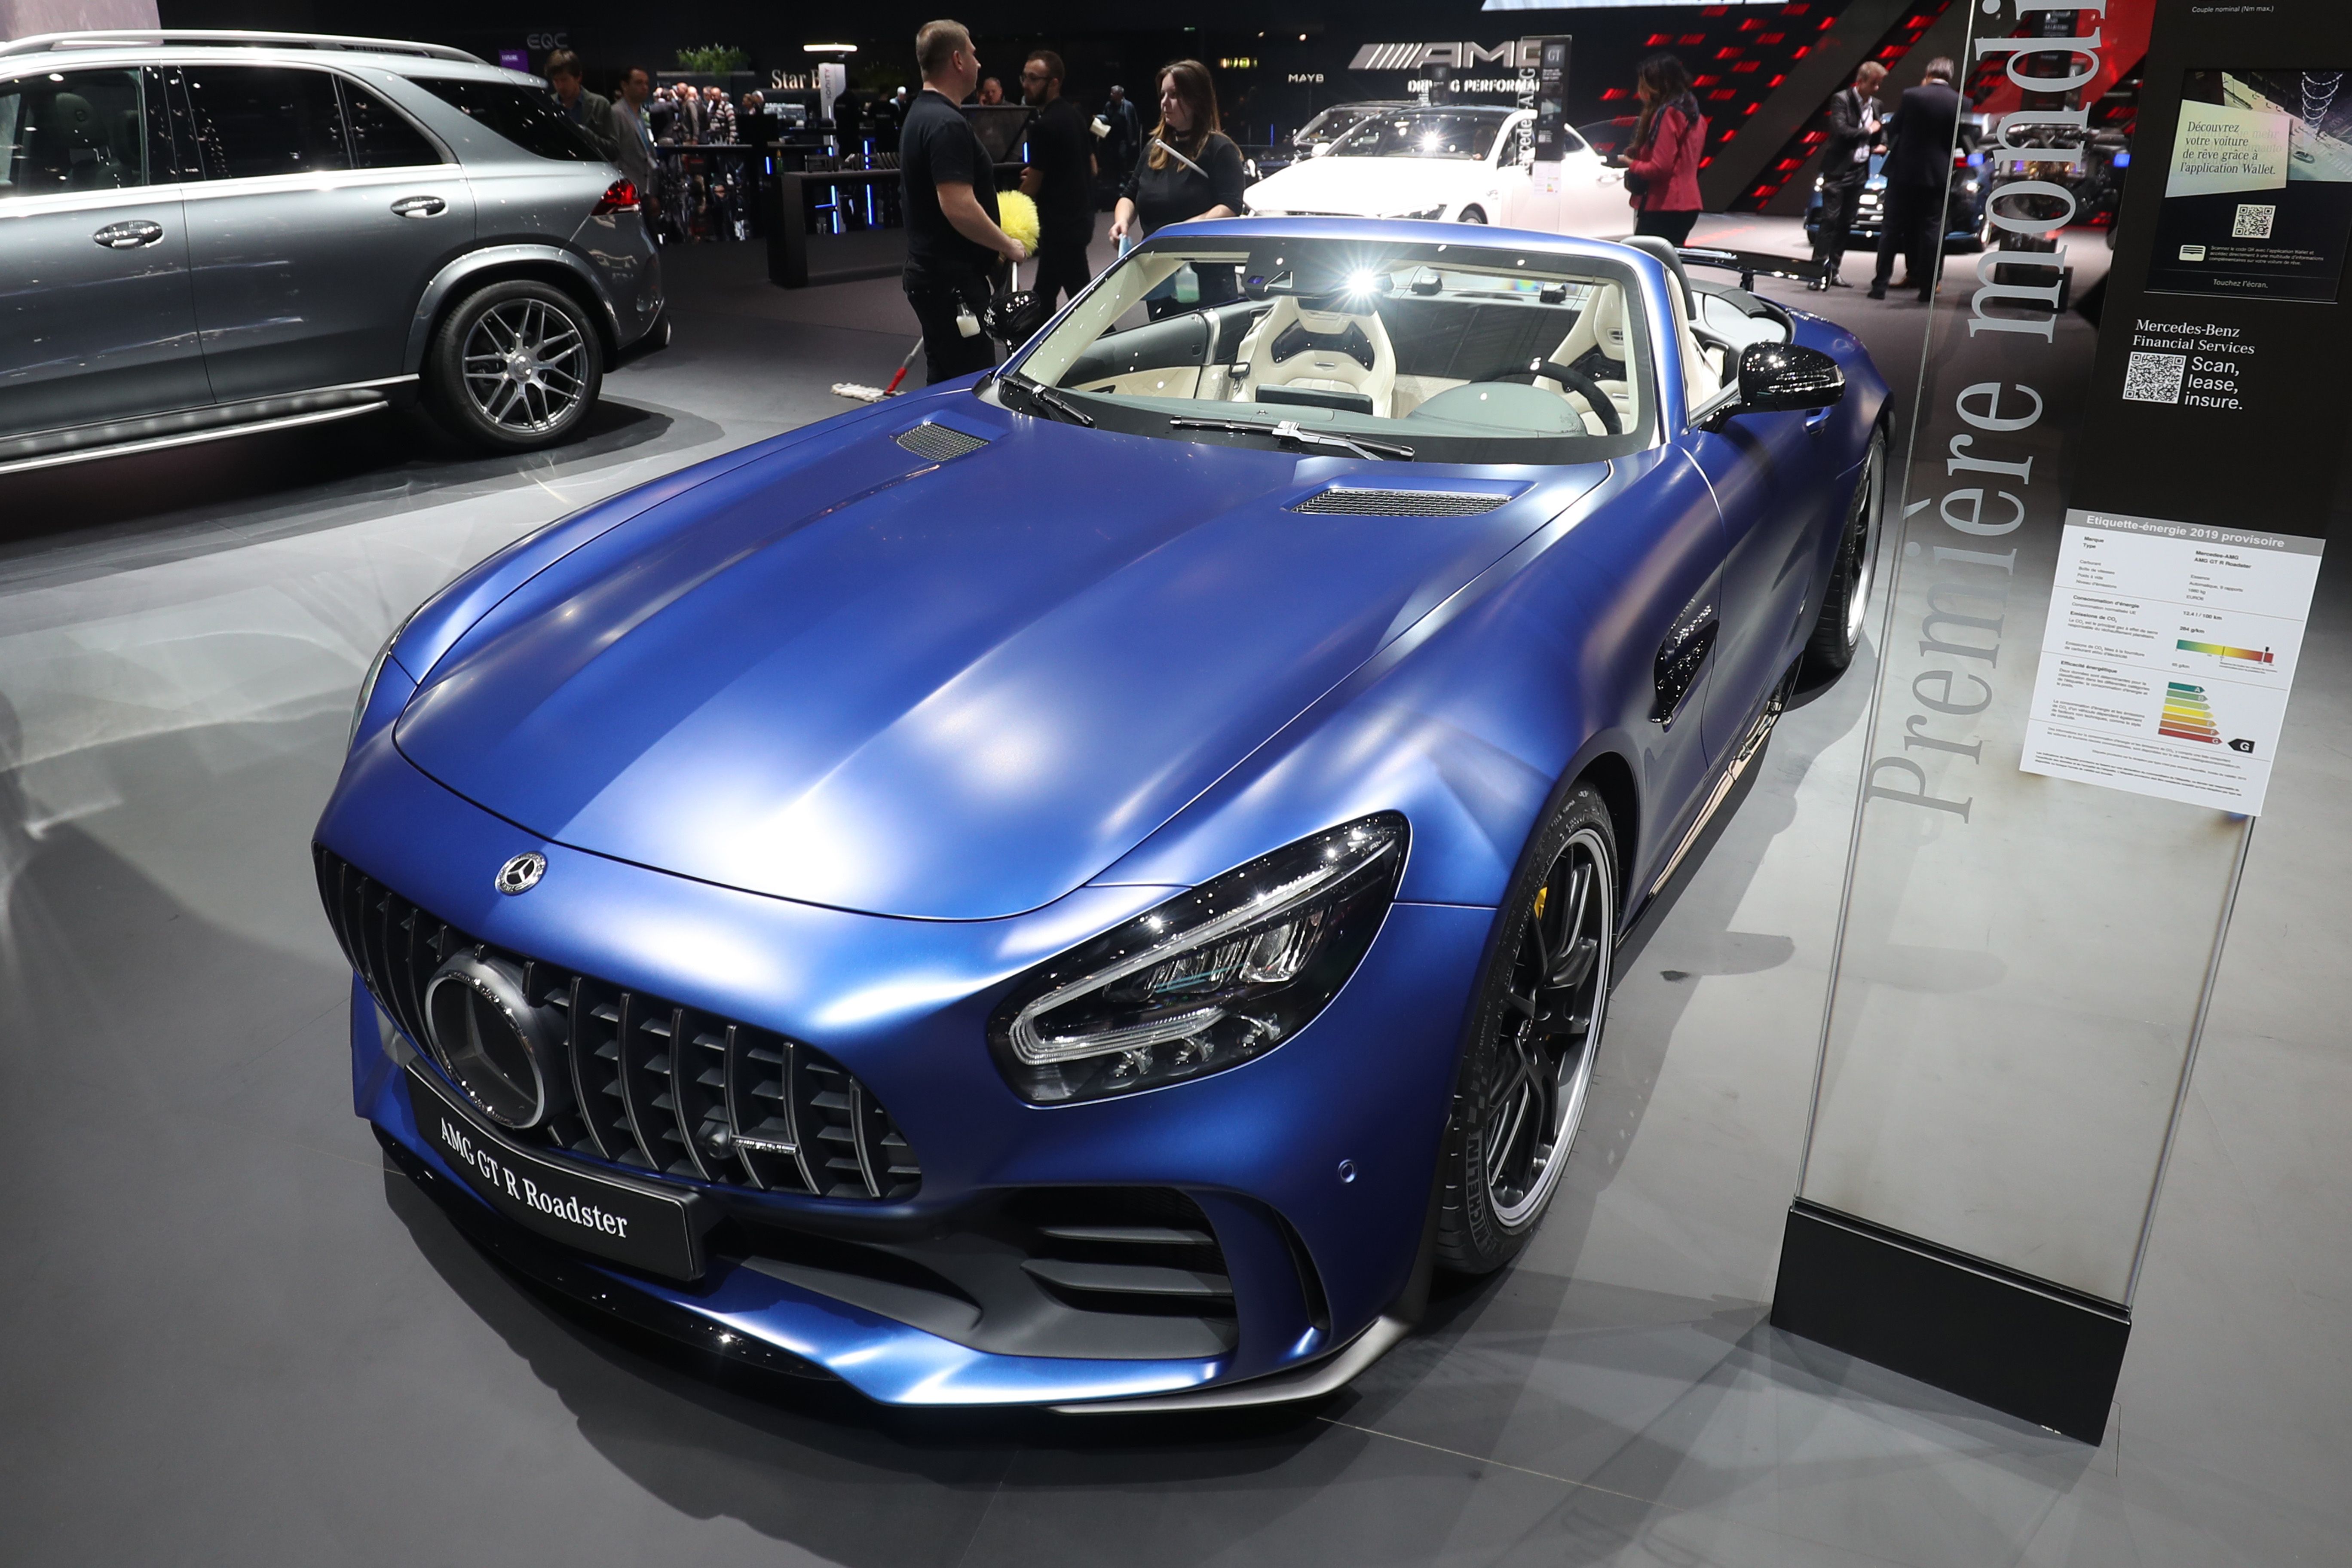 2019 Mercedes-AMG GT-R Roadster Has the Makings of a Future Collectible